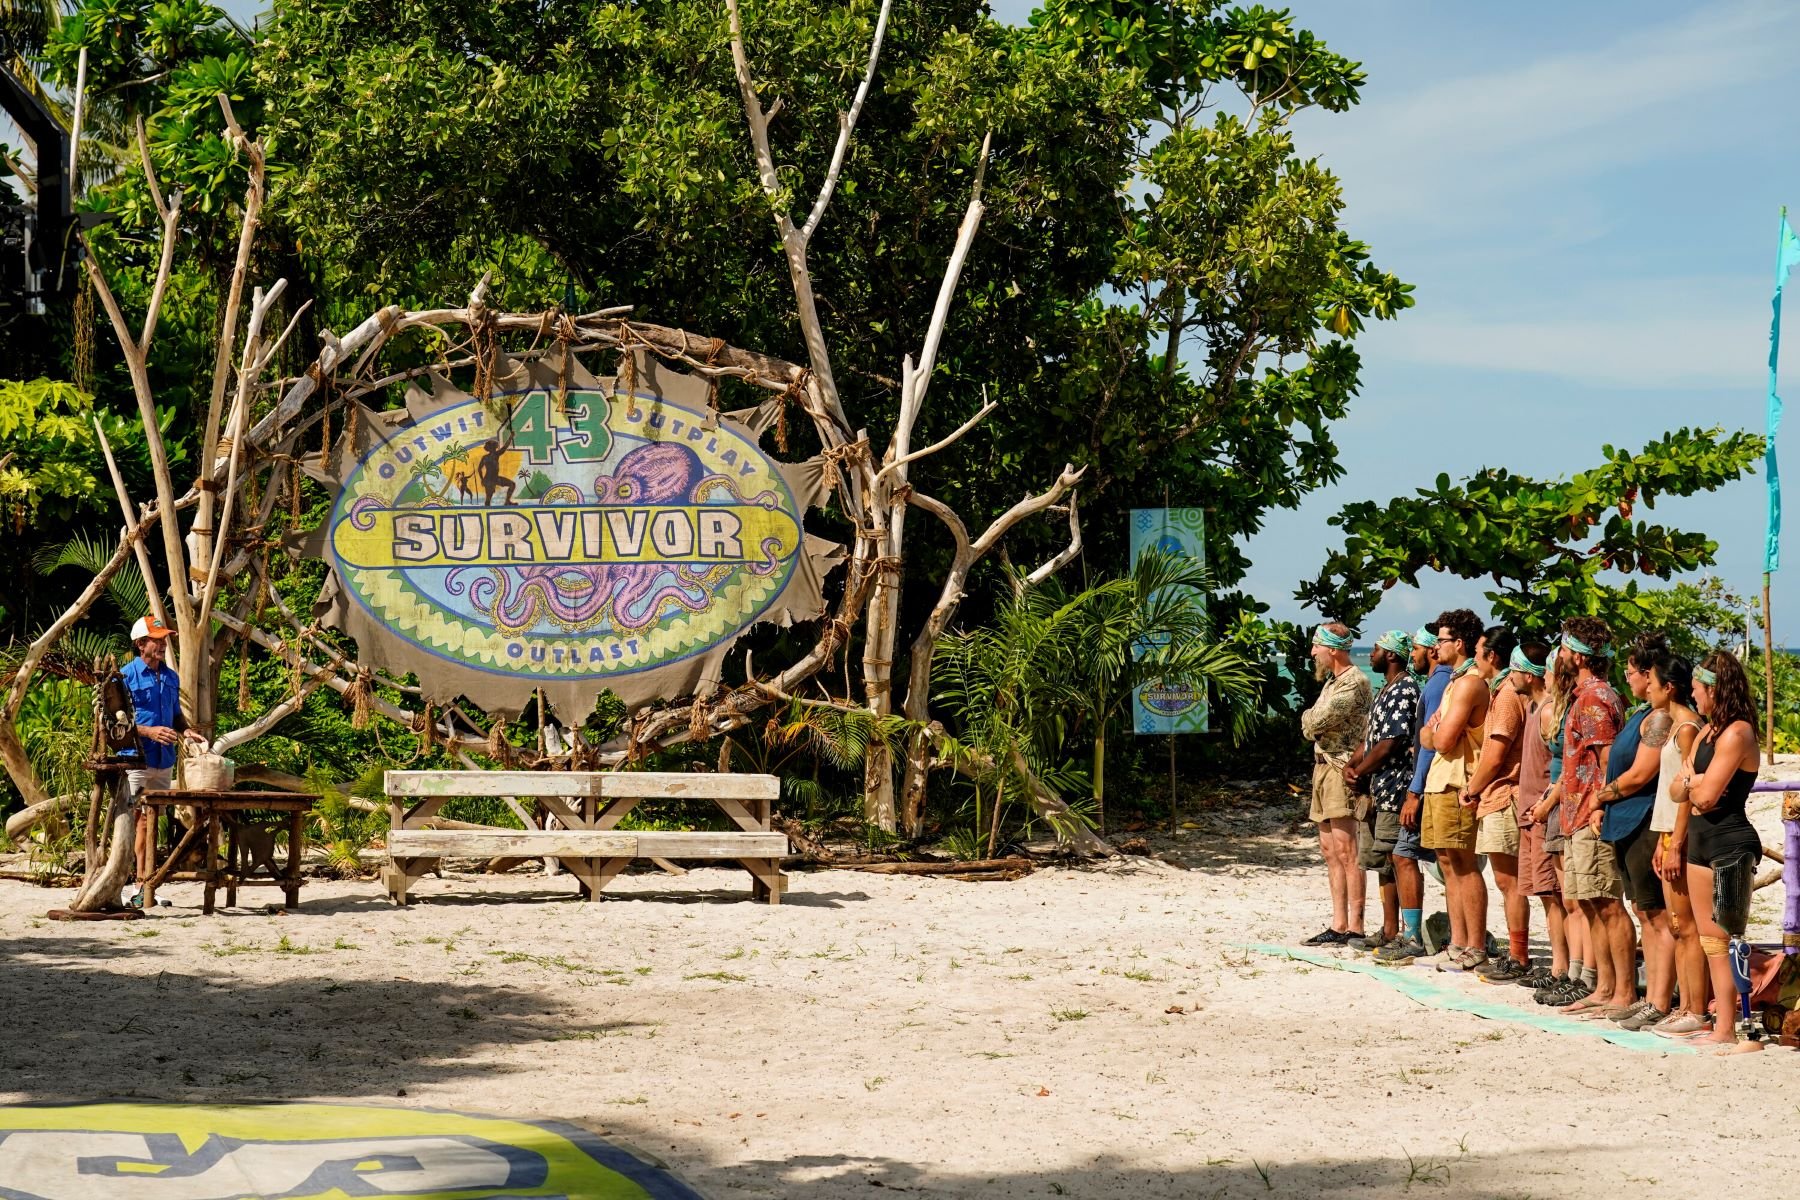 On the beach, host Jeff Probst explains the Immunity Challenge to the 'Survivor' Season 43 cast in episode 8, and according to spoilers, the castaways will bargain for more food in this episode.